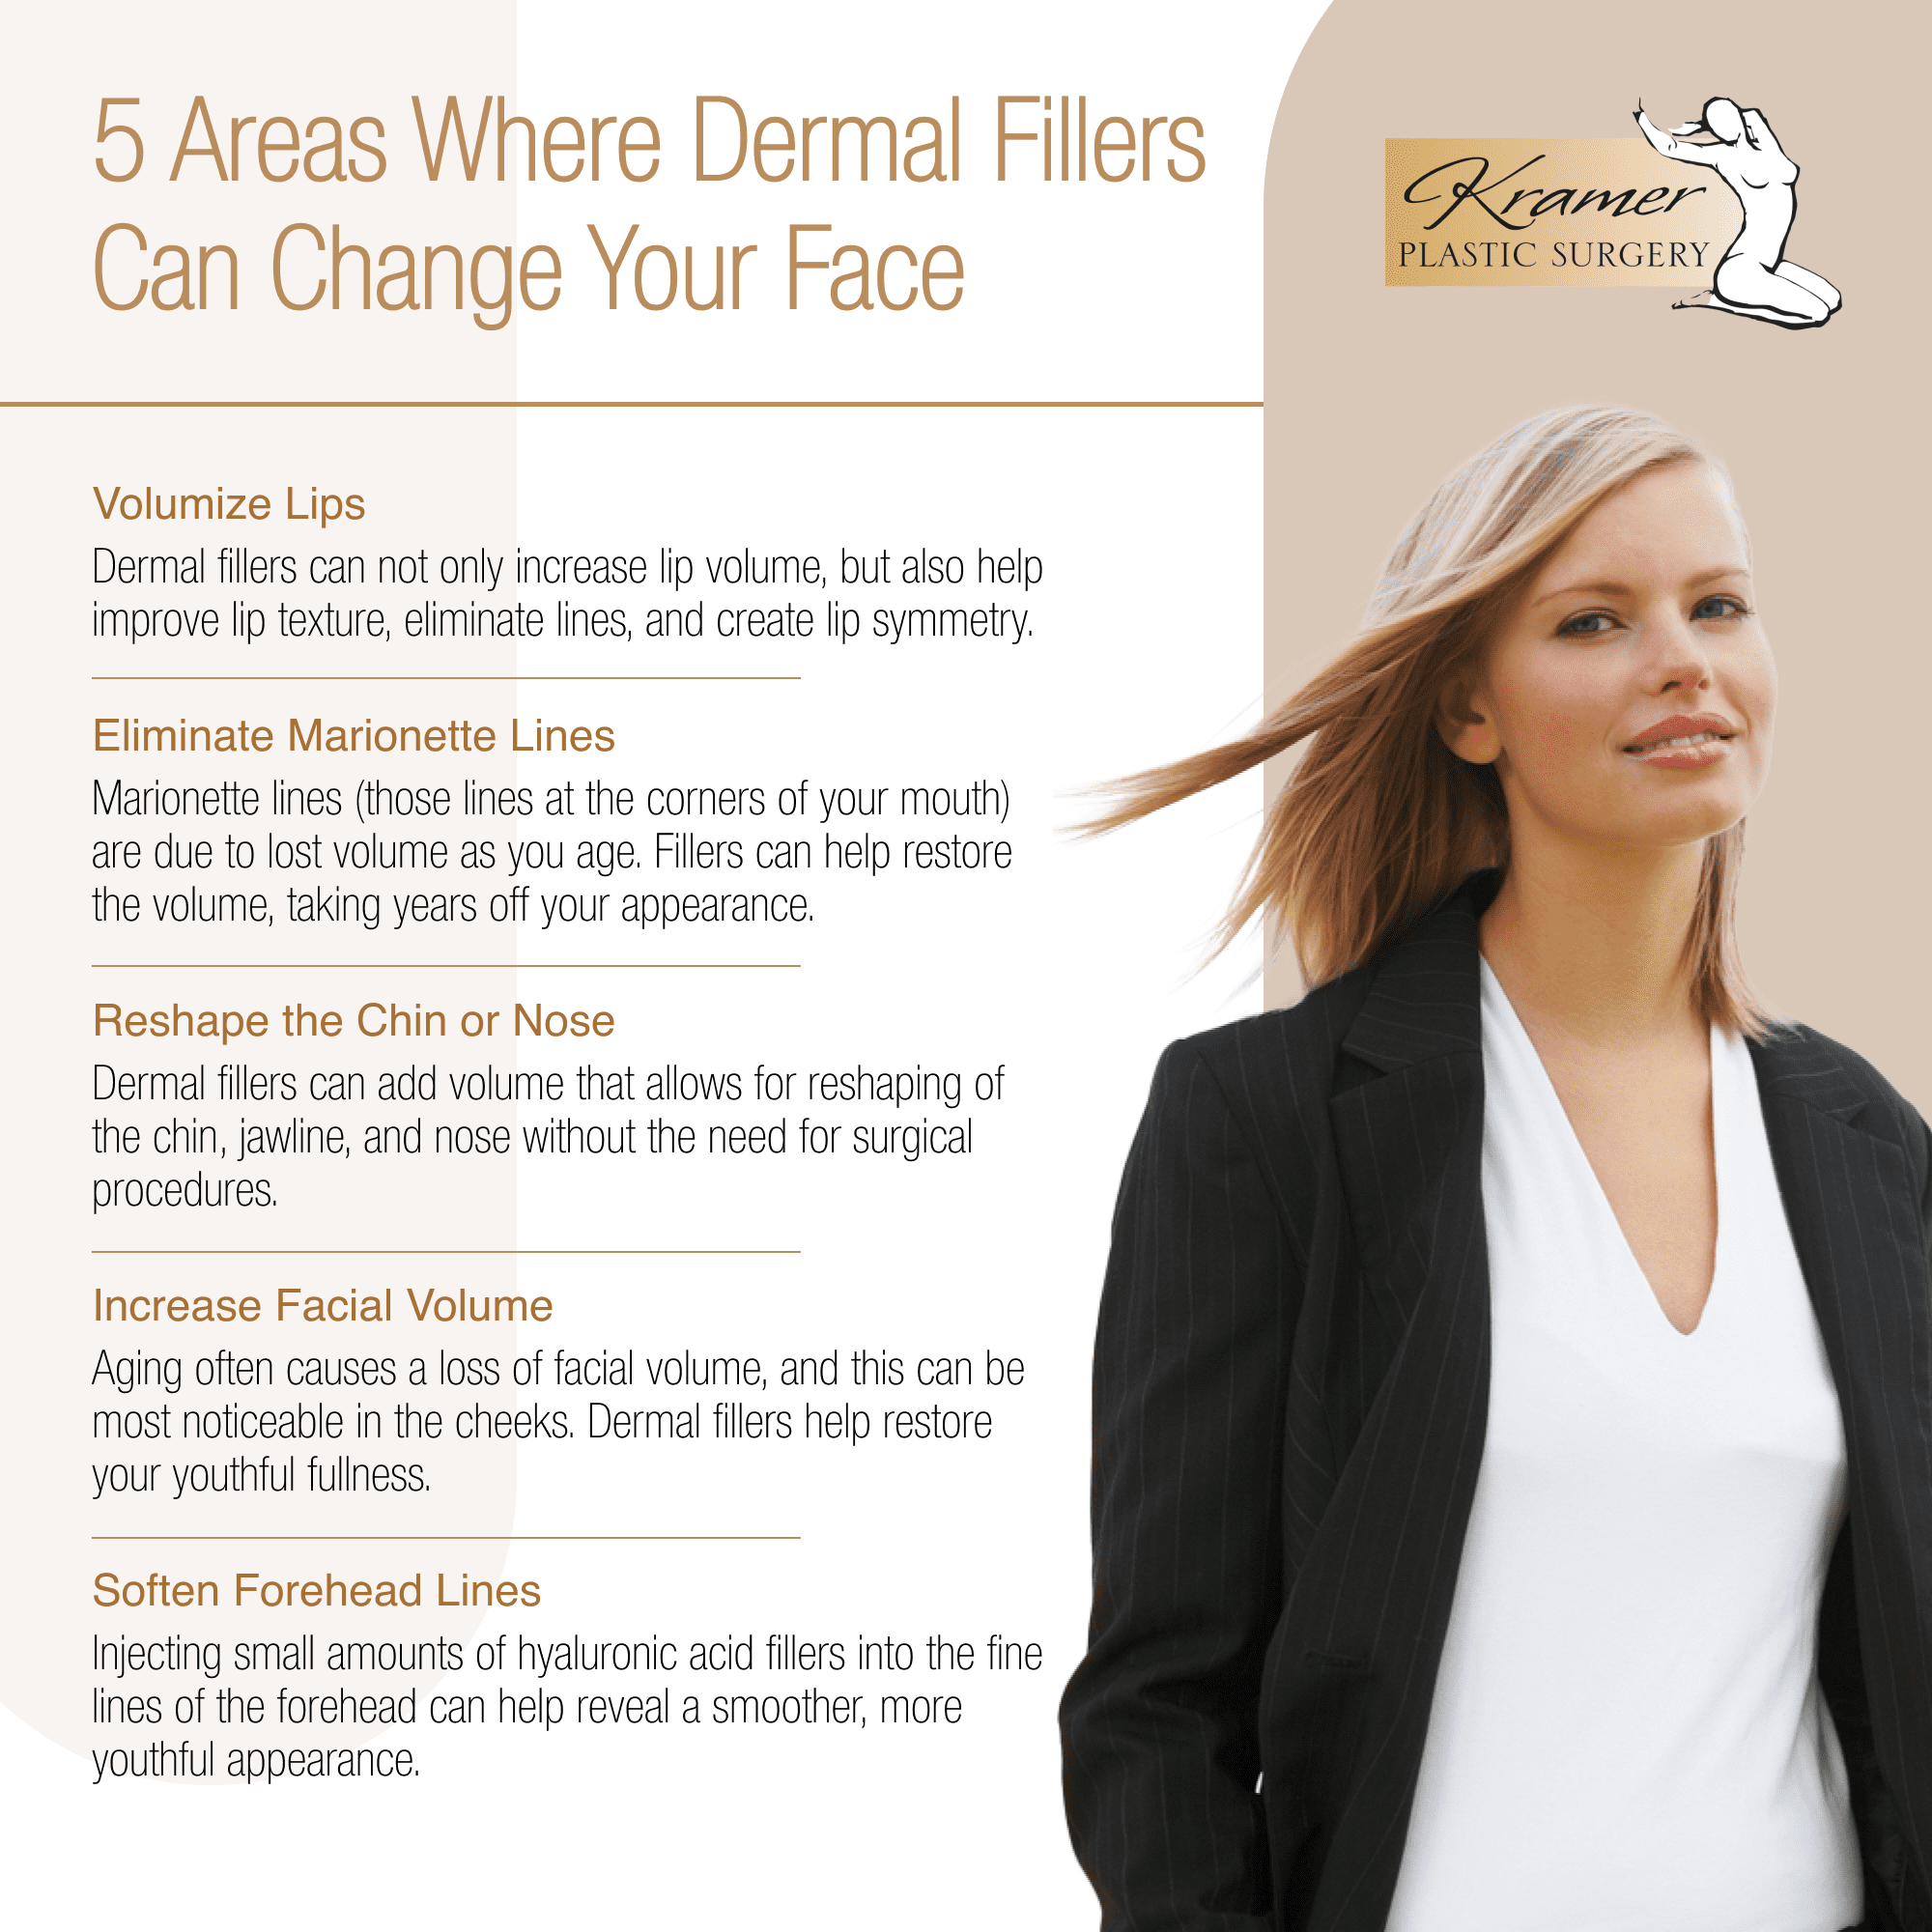 5 Areas Where Dermal Fillers Can Change Your Face